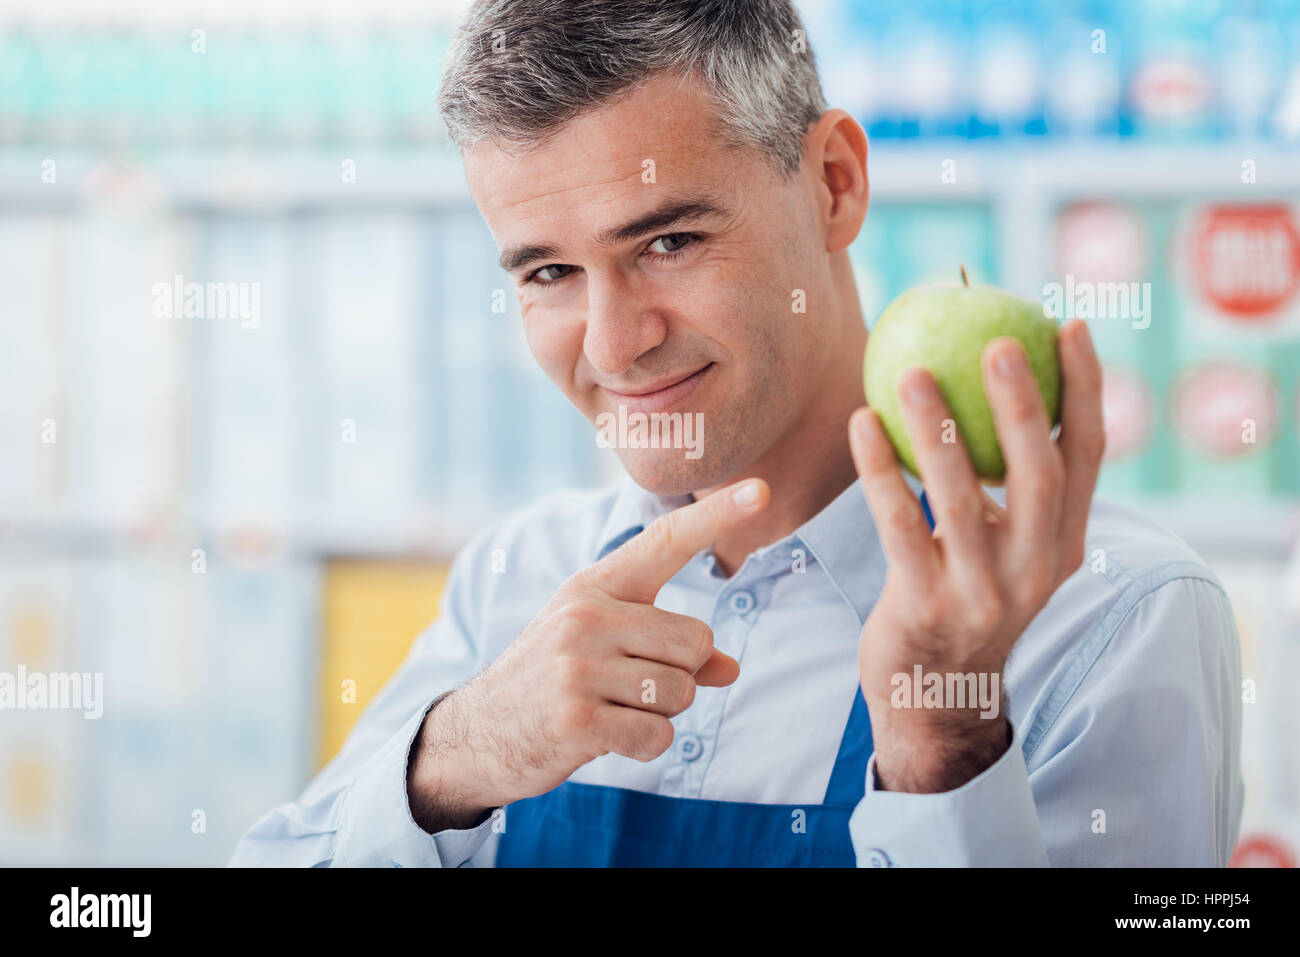 Smiling supermarket clerk showing a fresh apple, freshness and top quality food concept Stock Photo